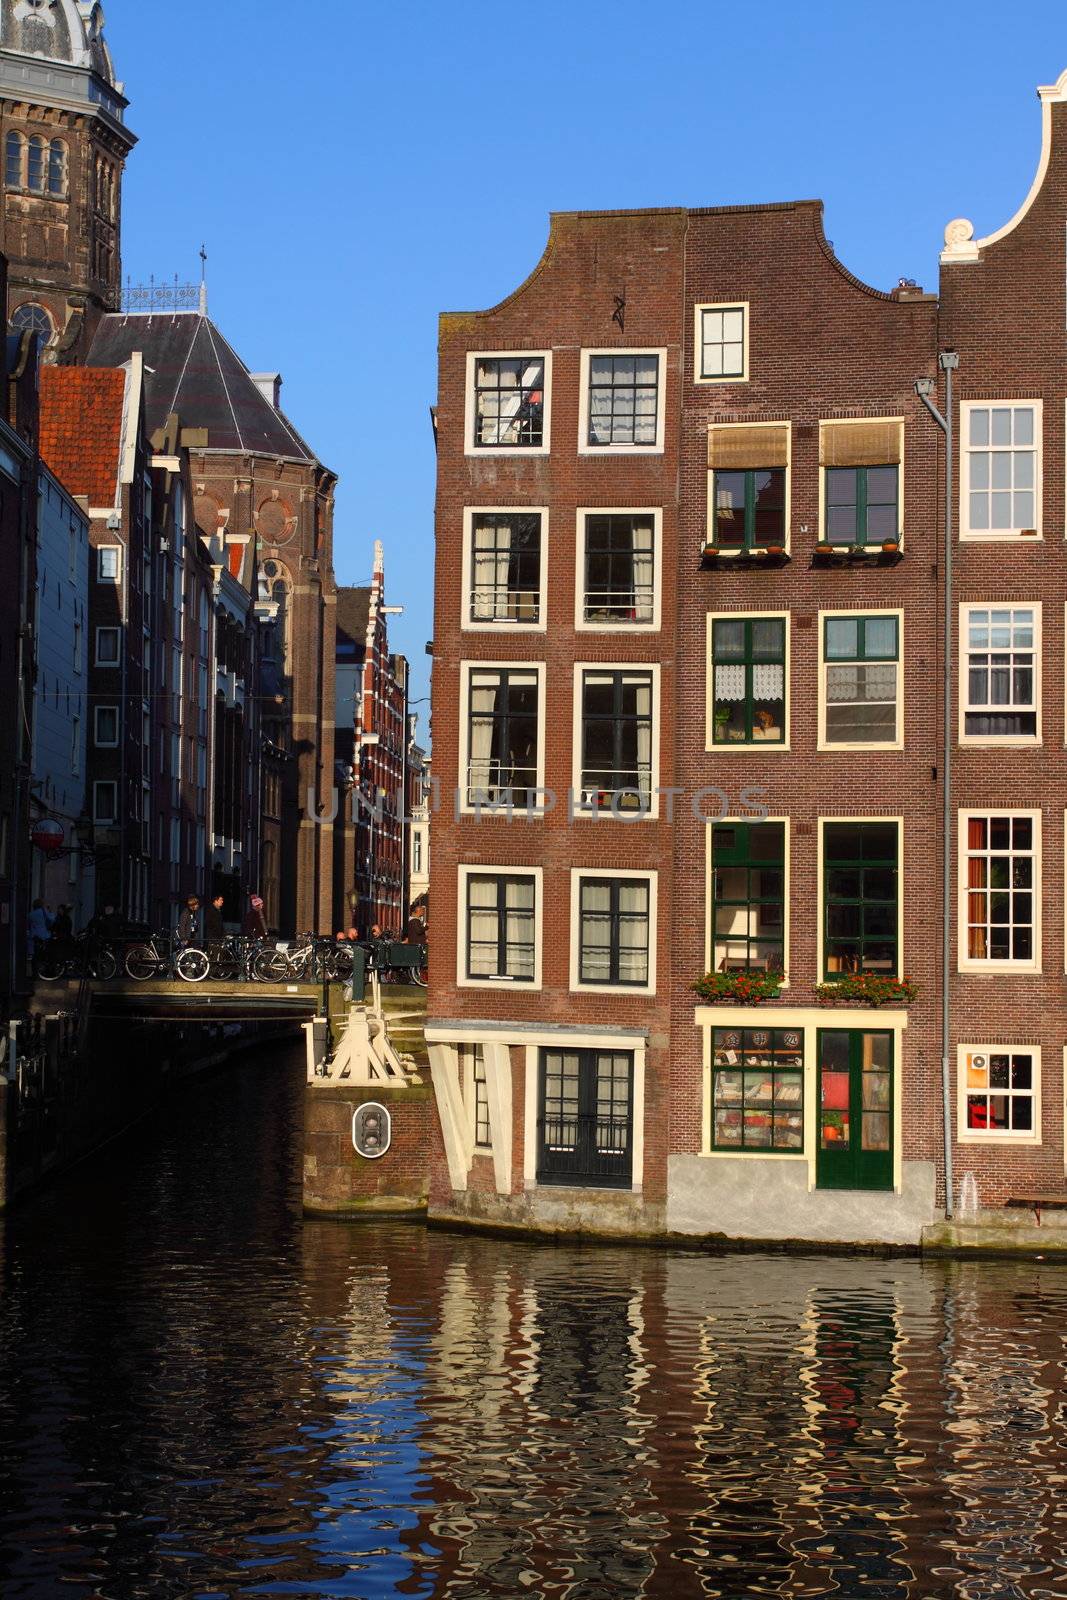 House architecture in Amsterdam 